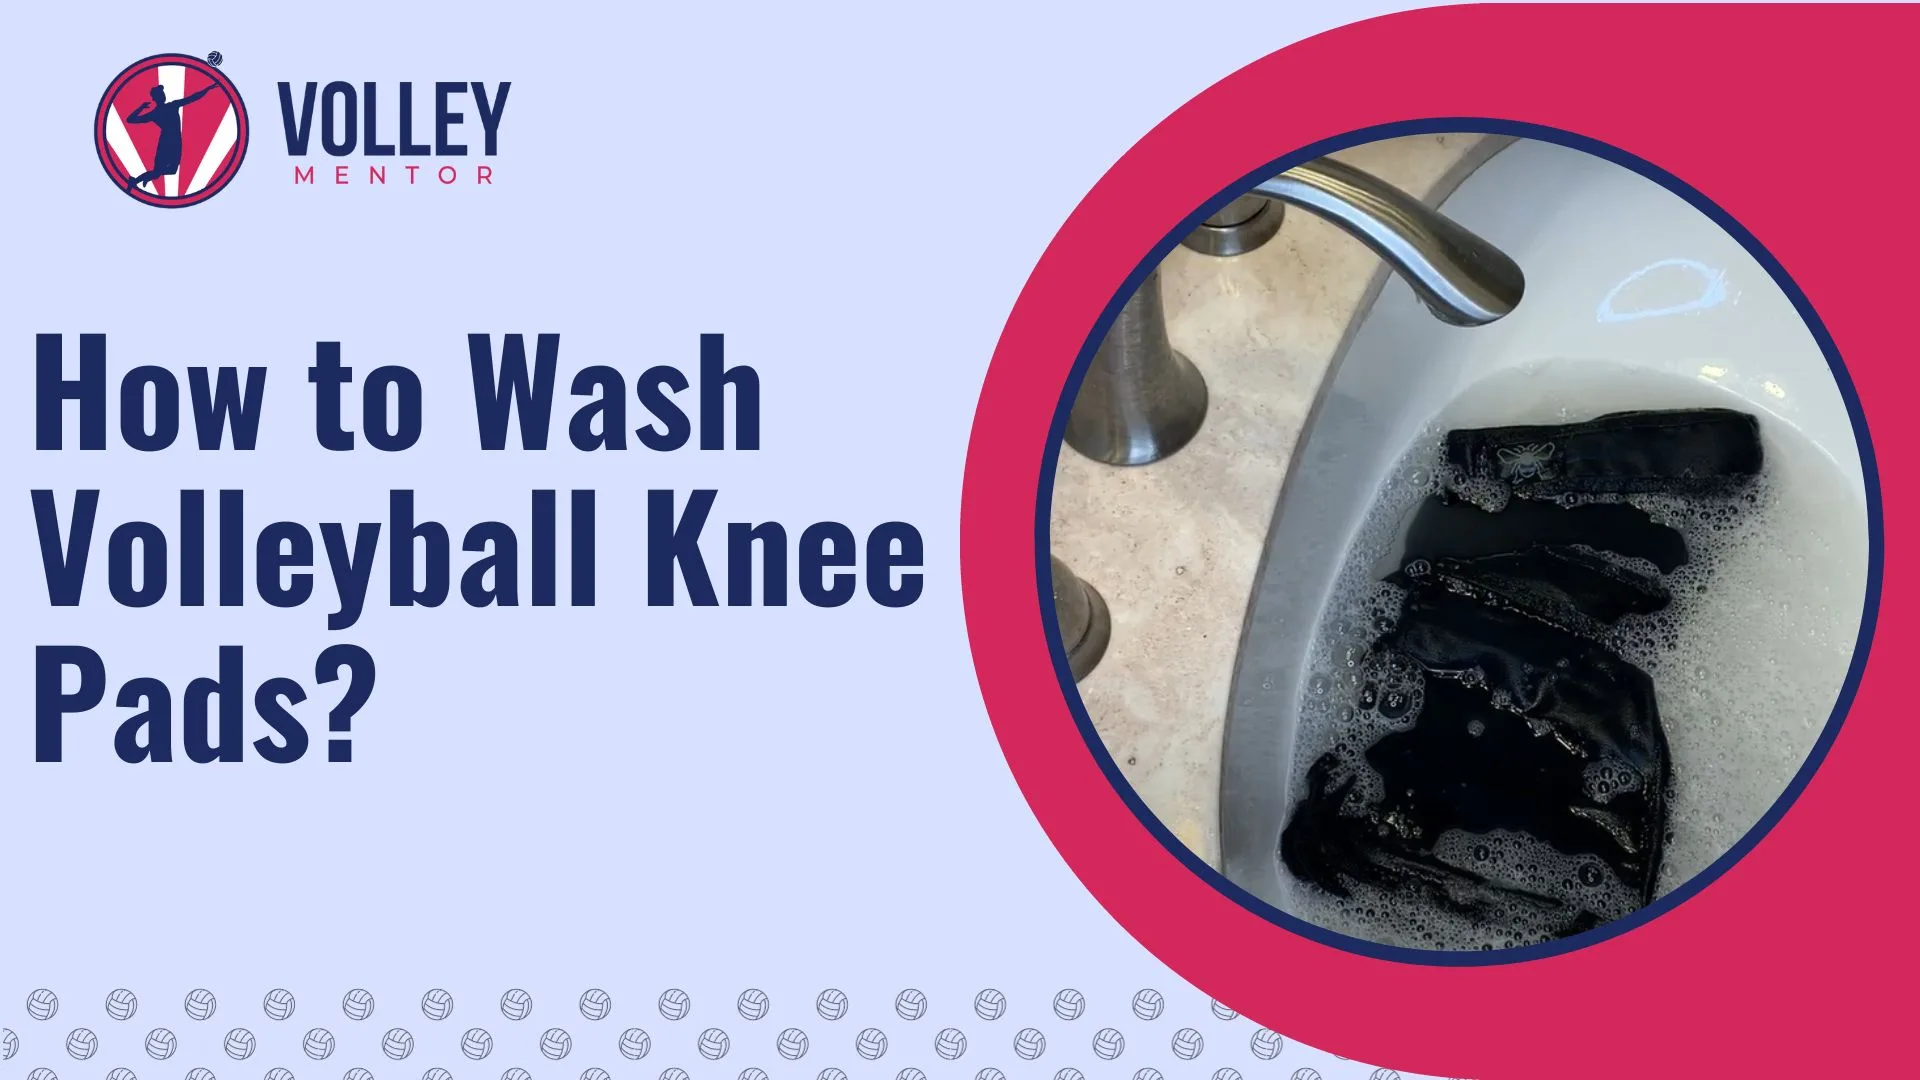 How to wash Volleyball Knee Pads